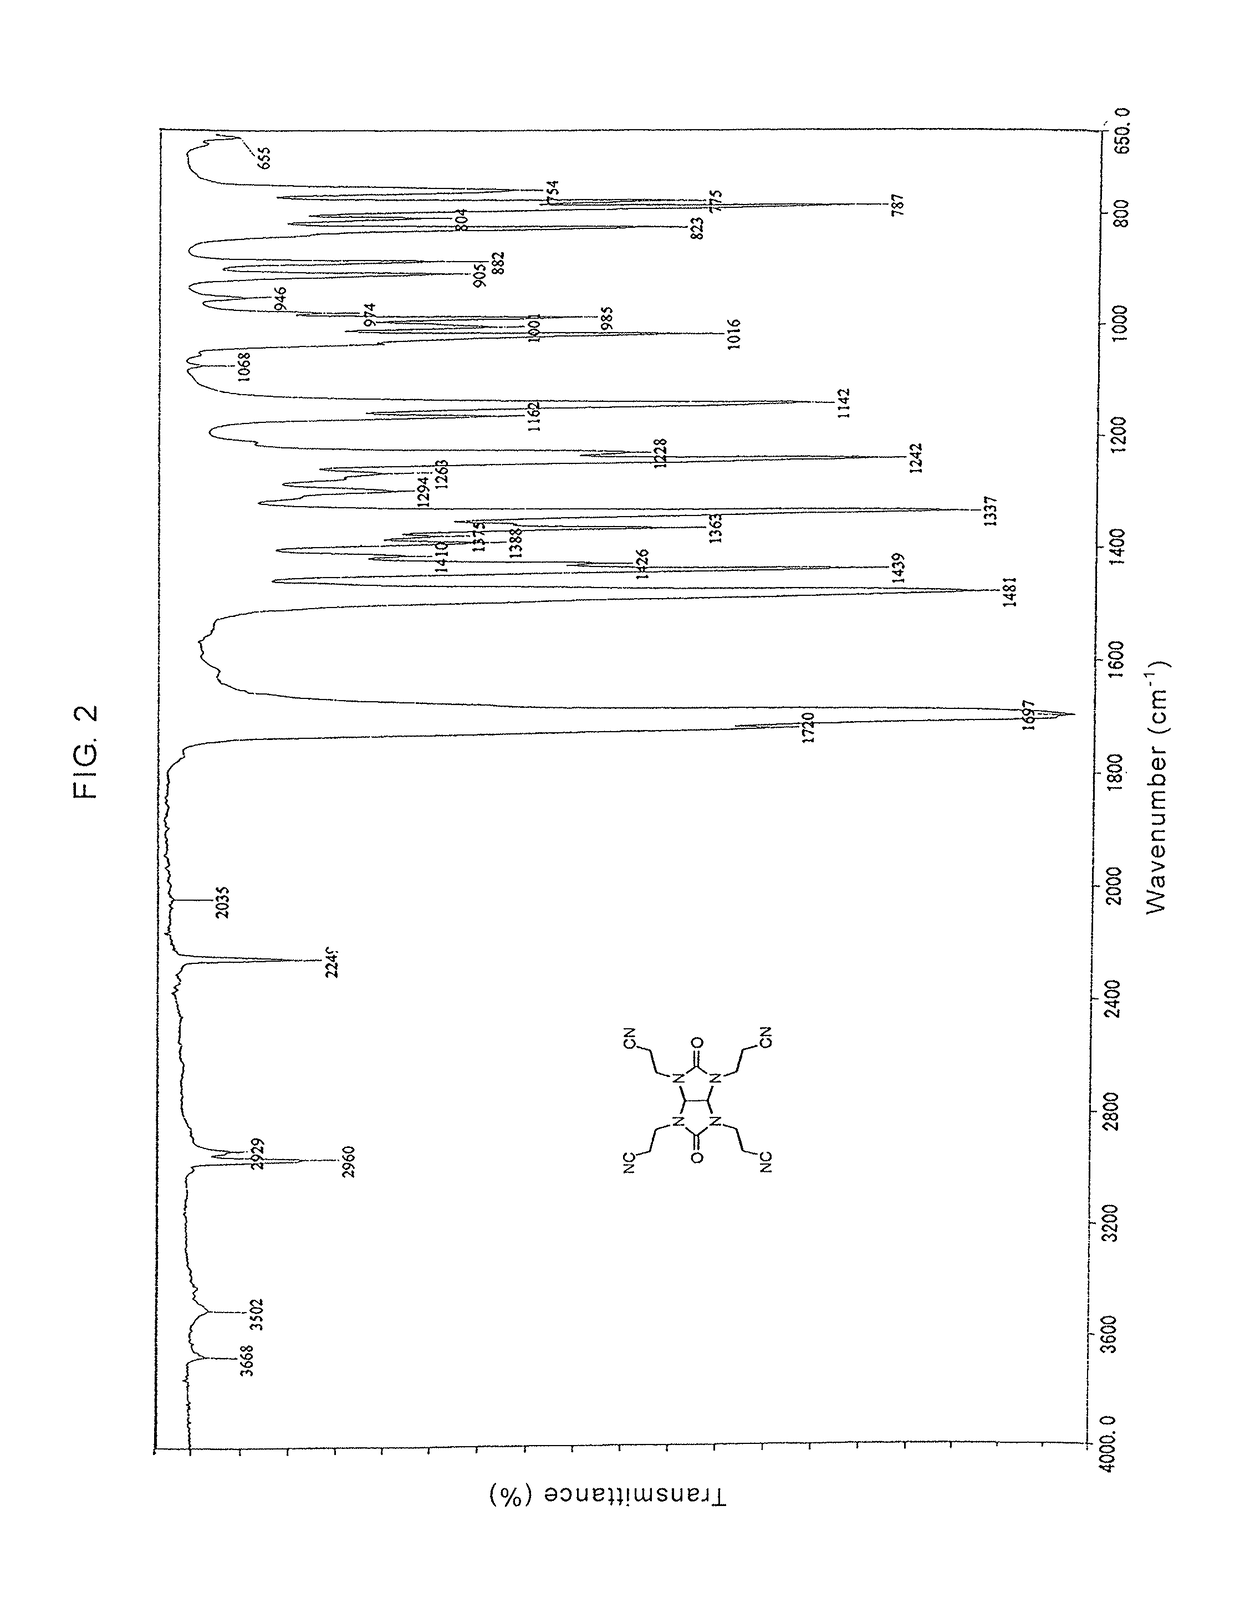 Glycolurils having functional groups and use thereof